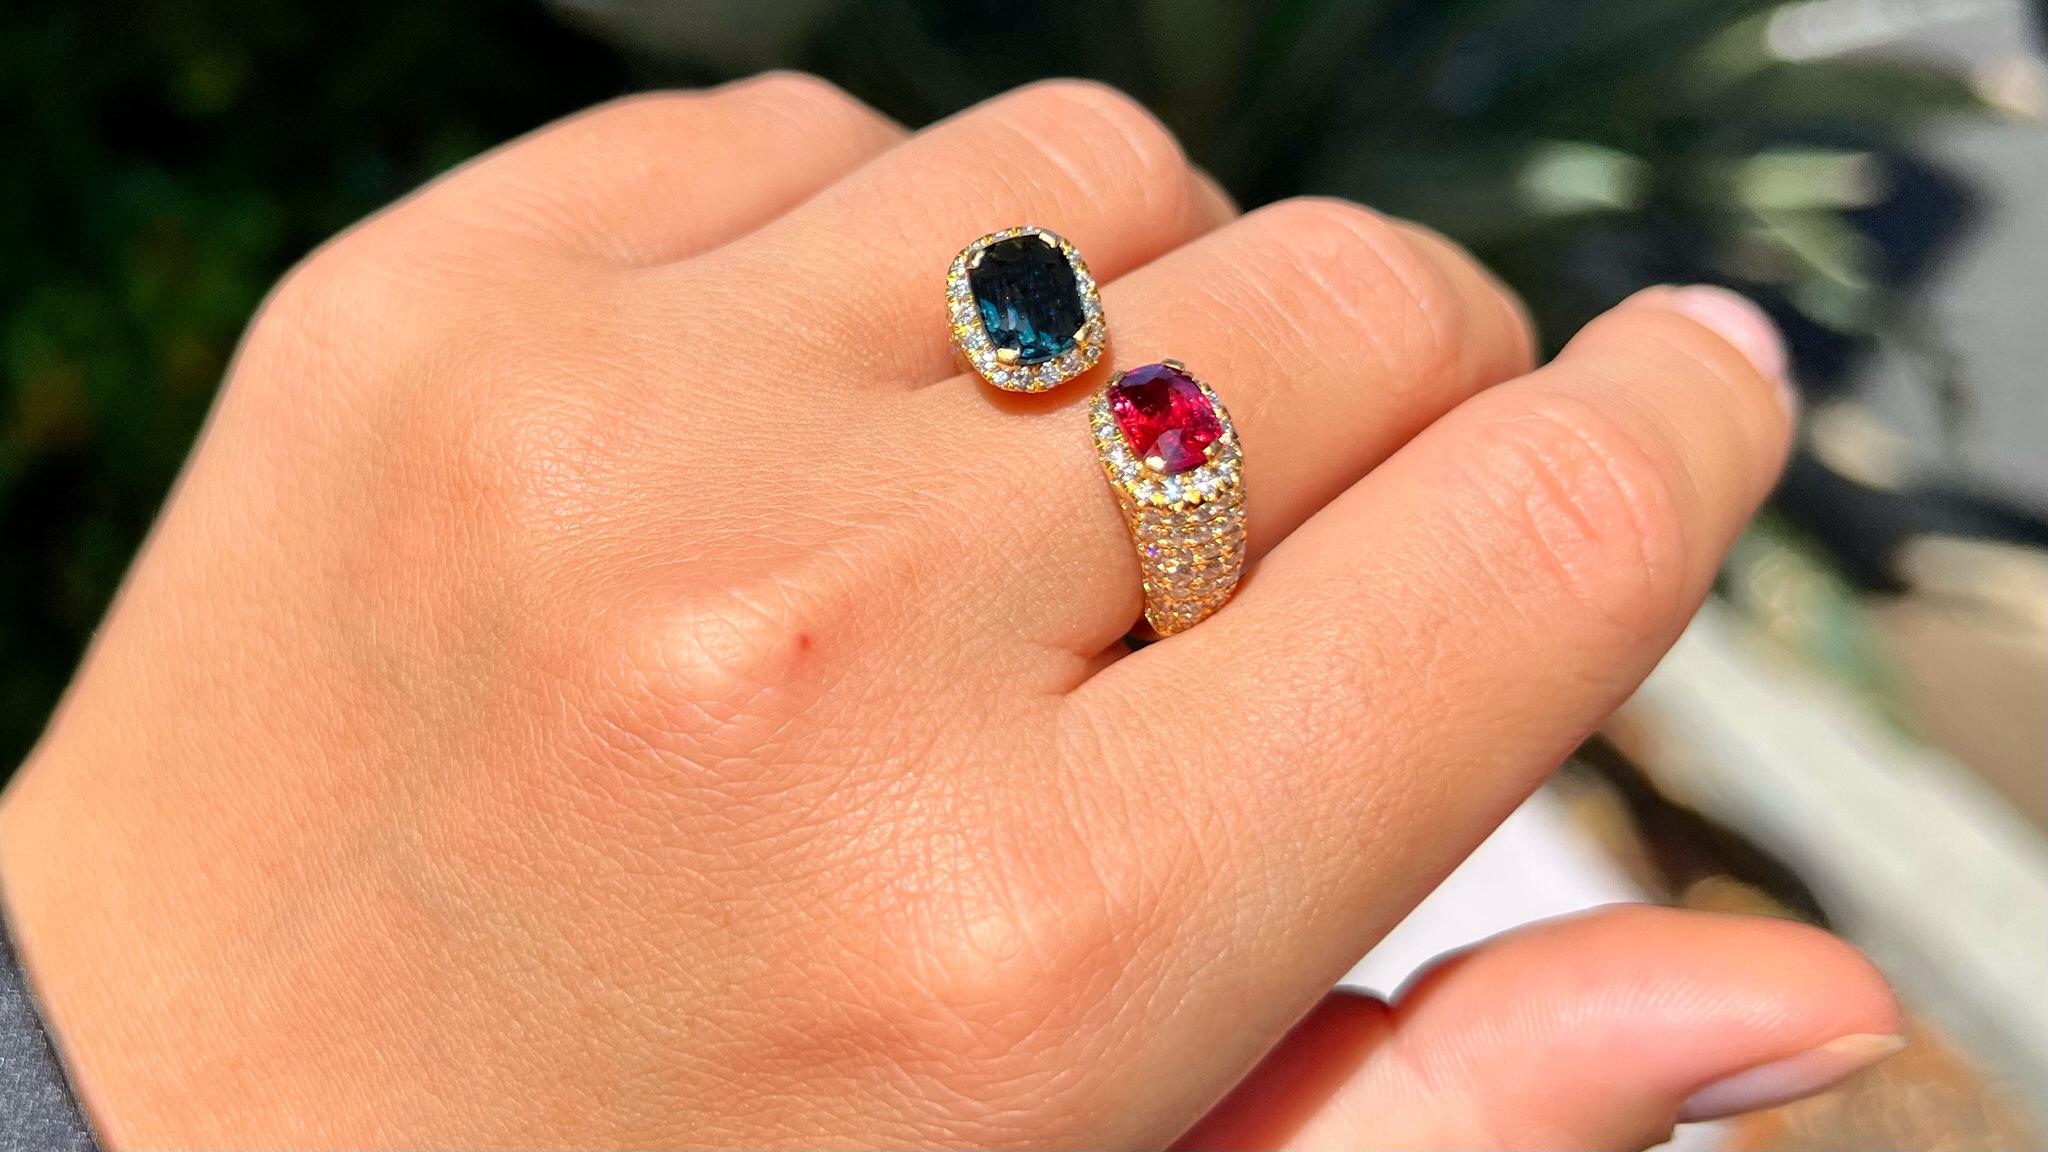 Rare Natural Blue and Red Spinel Bypass Ring Diamond Setting 4 Carats 18K Gold In Excellent Condition For Sale In Laguna Niguel, CA